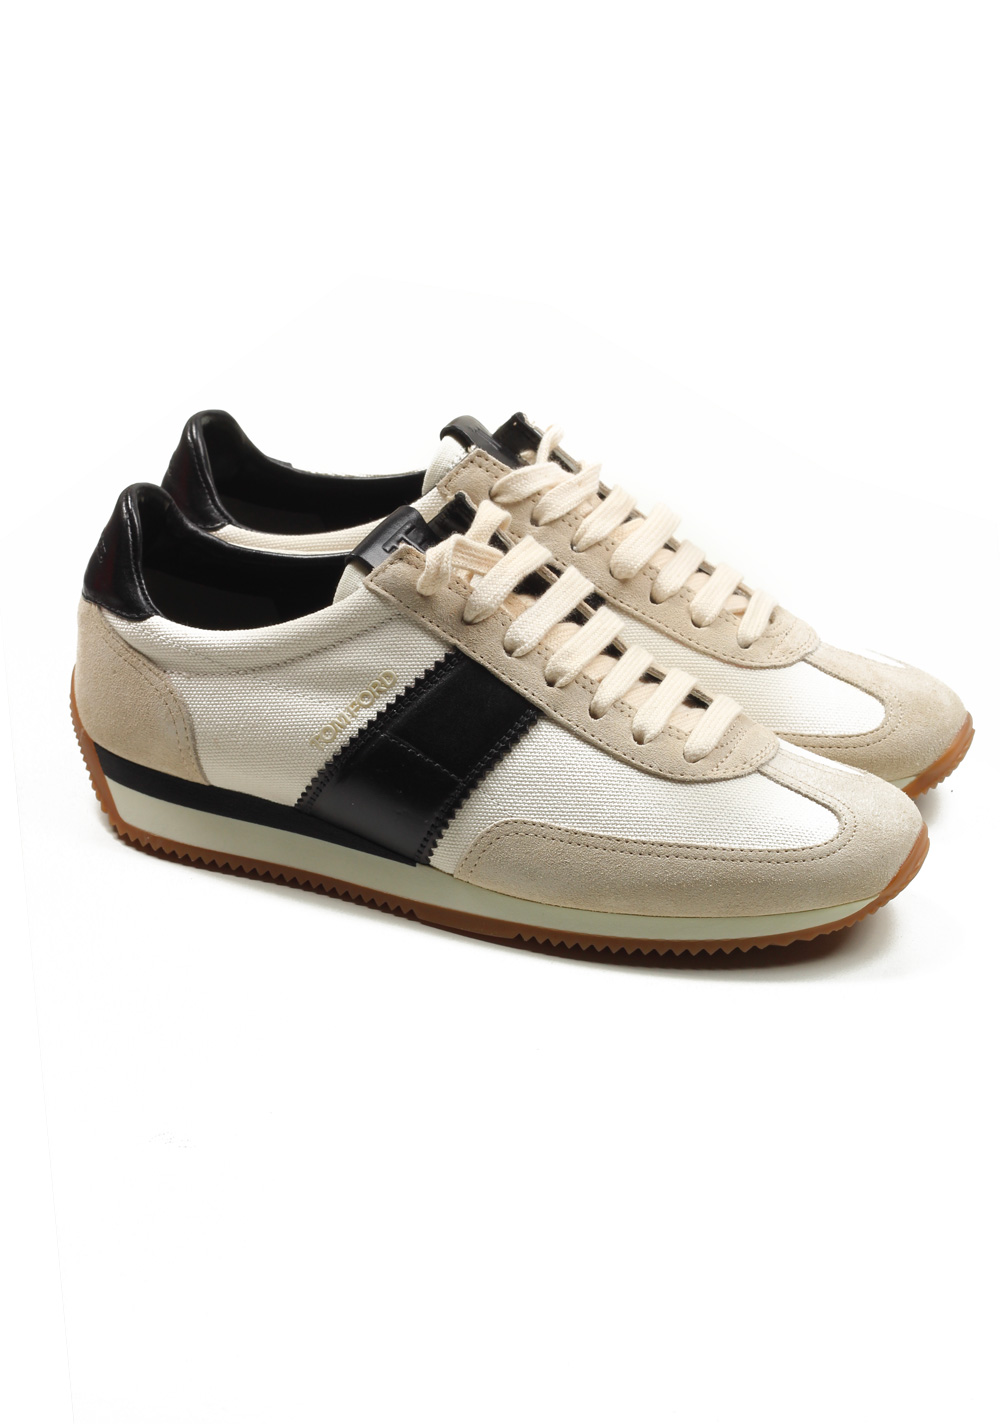 TOM FORD Orford Colorblock Suede White Black Trainer Sneaker Shoes Size 8  UK / 9 . |